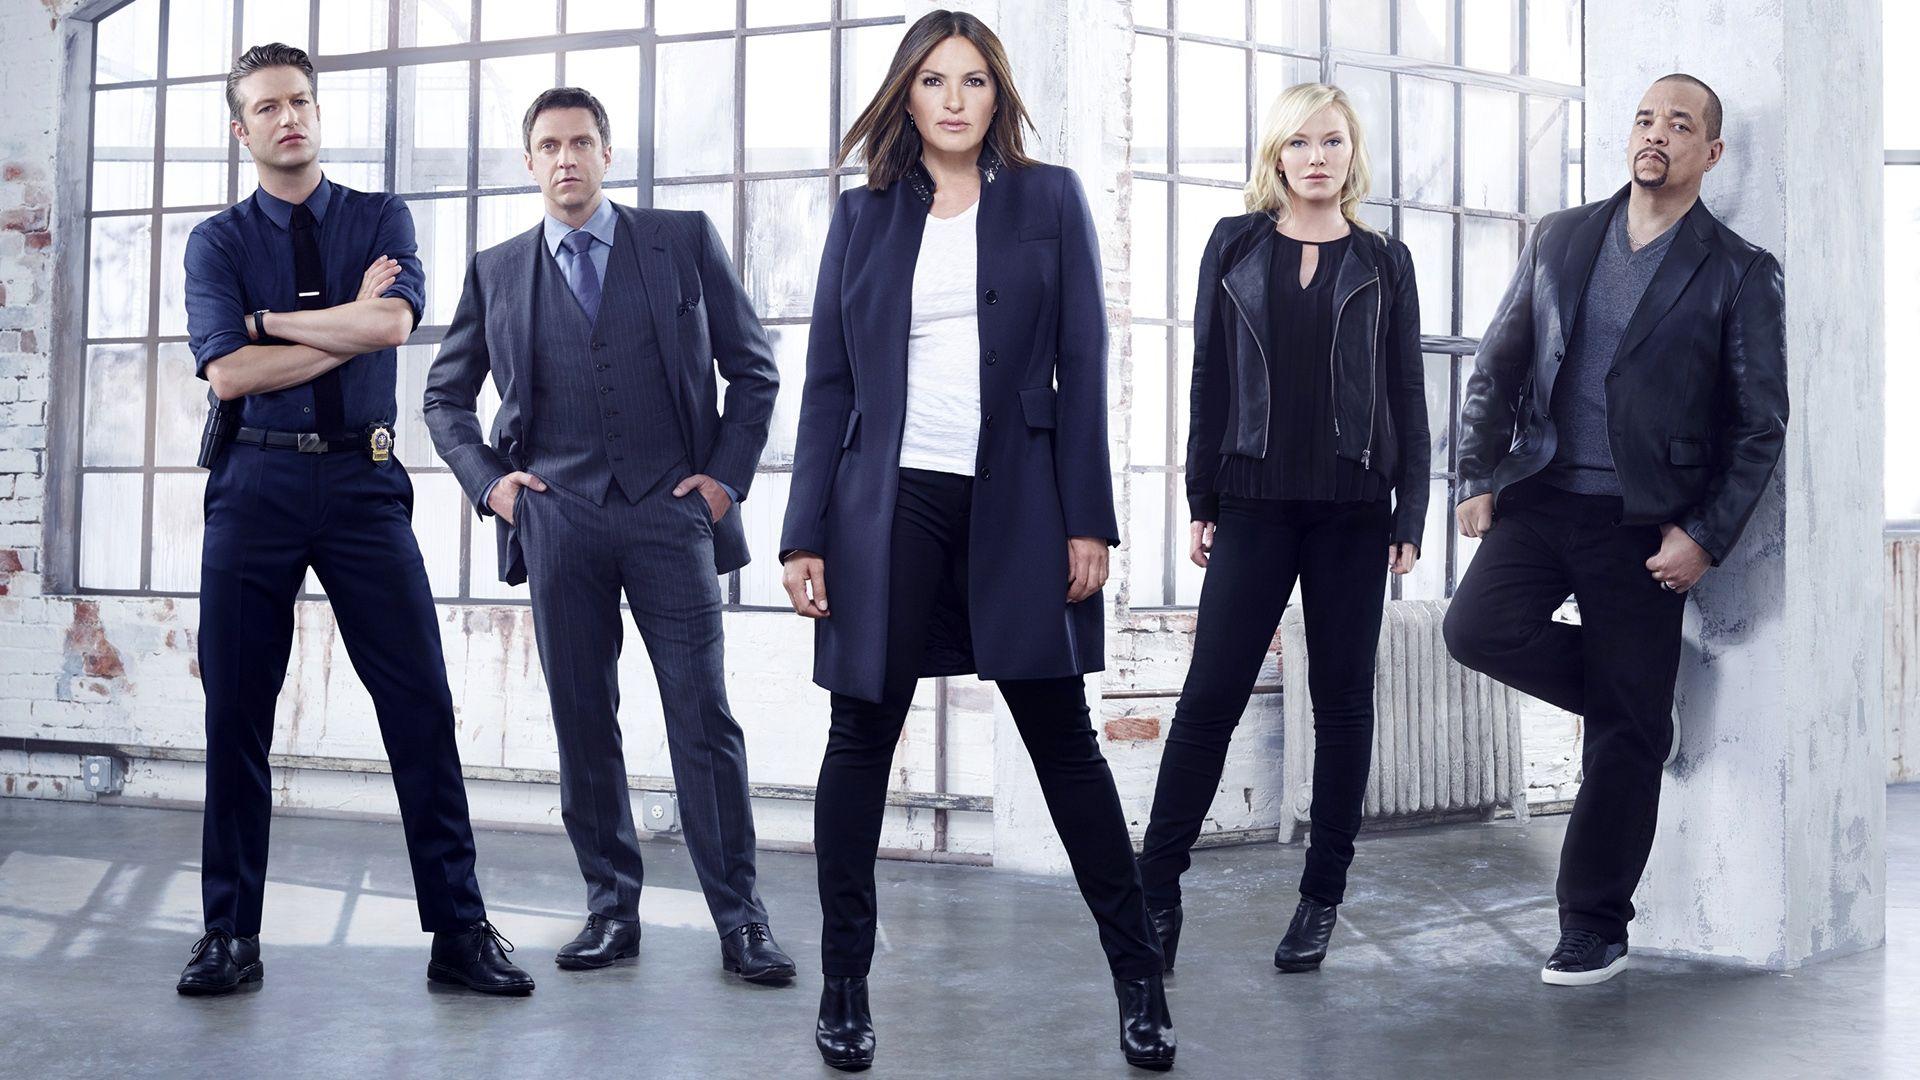 Download 1920x1080 Law And Order: Special Victims Unit, Tv Series